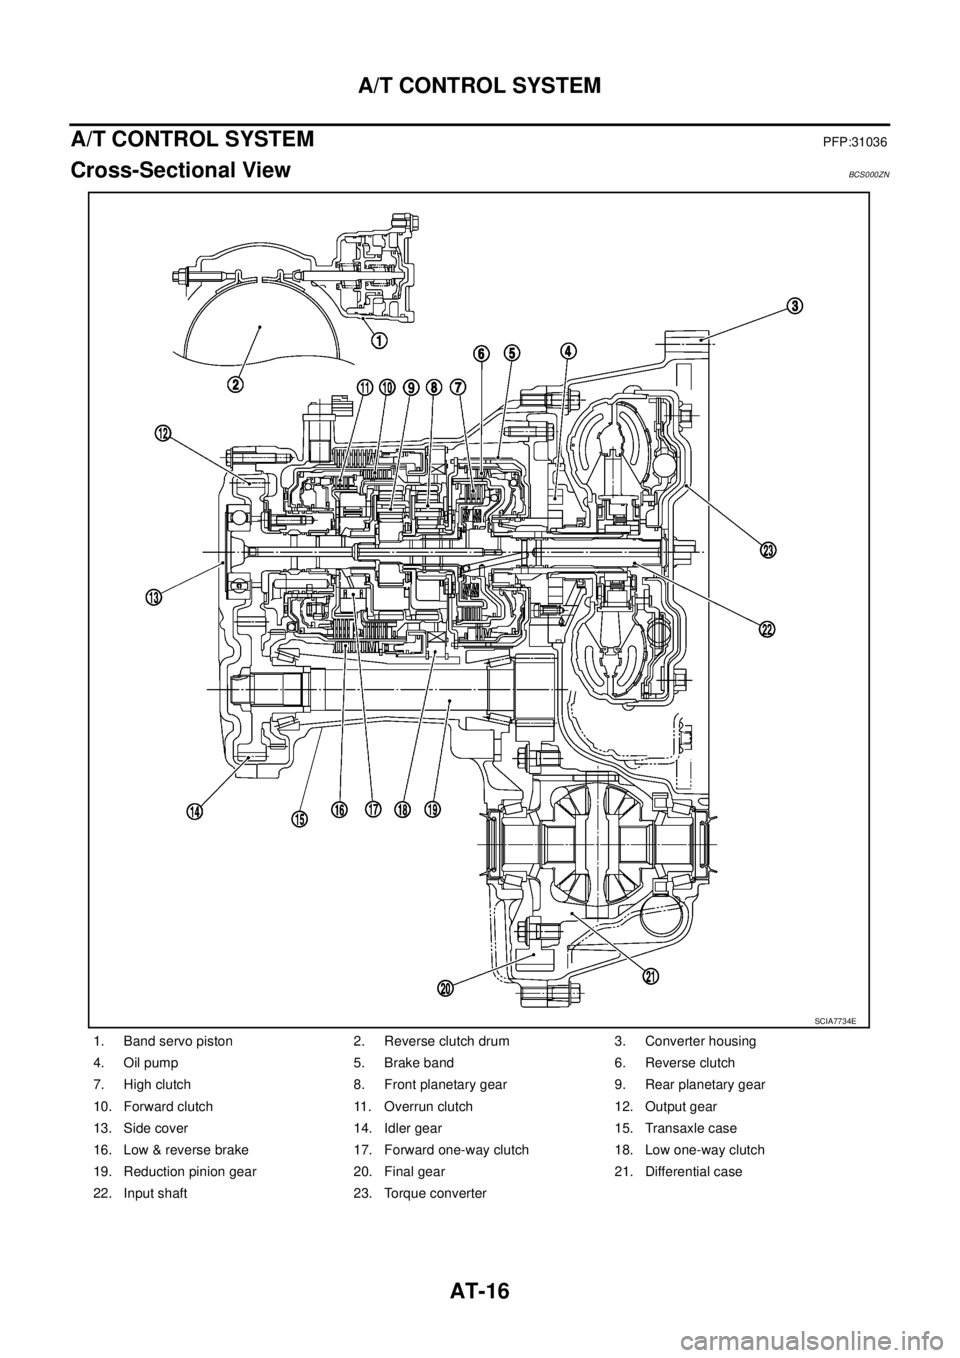 NISSAN TEANA 2003  Service Manual AT-16
A/T CONTROL SYSTEM
 
A/T CONTROL SYSTEMPFP:31036
Cross-Sectional View BCS000ZN
1. Band servo piston 2. Reverse clutch drum 3. Converter housing
4. Oil pump 5. Brake band 6. Reverse clutch
7. Hig